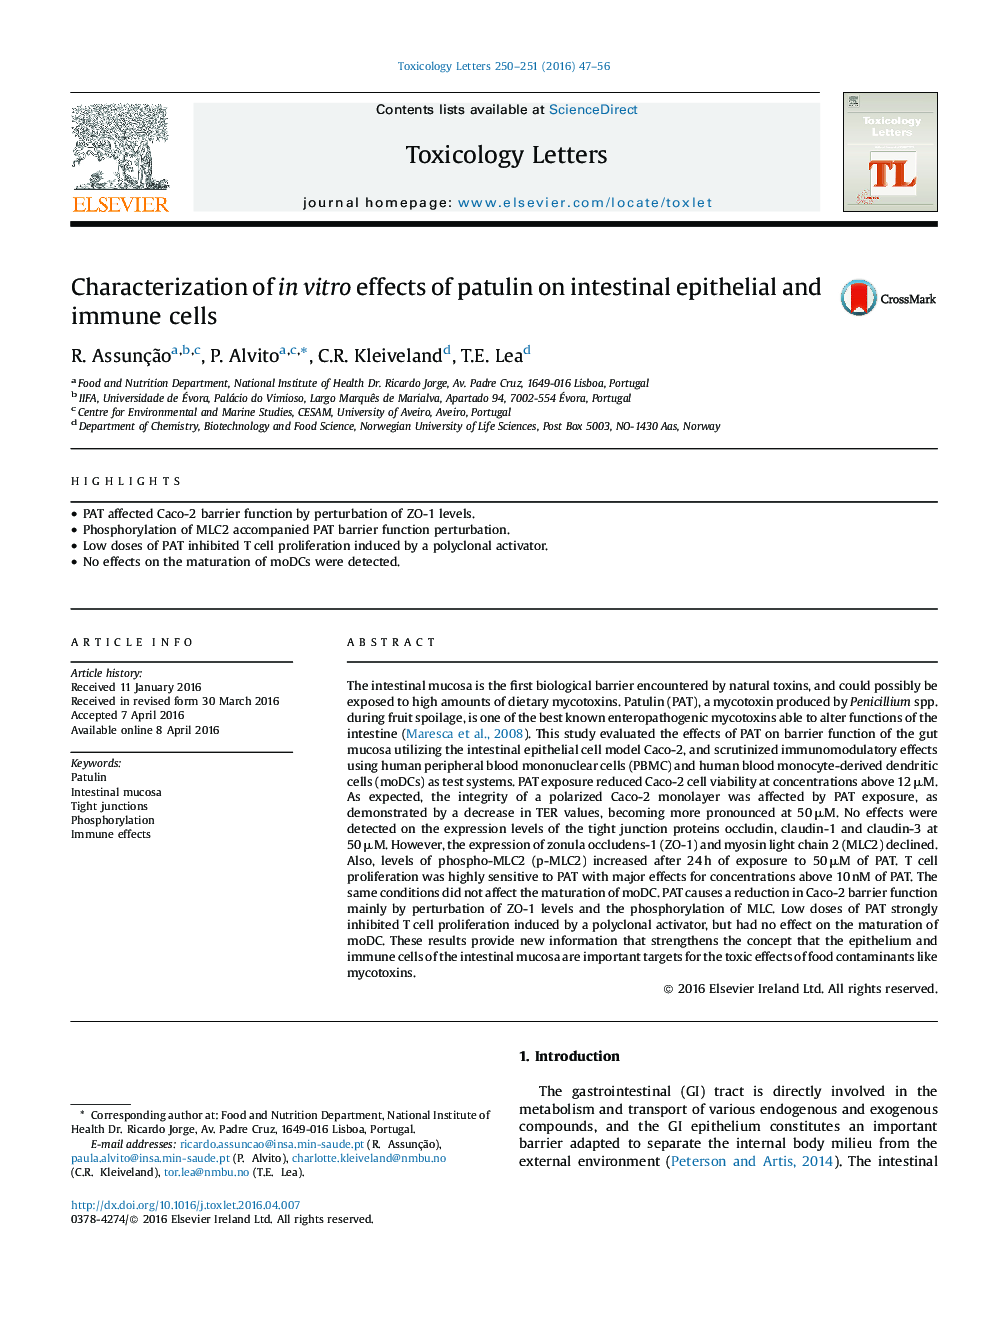 Characterization of in vitro effects of patulin on intestinal epithelial and immune cells